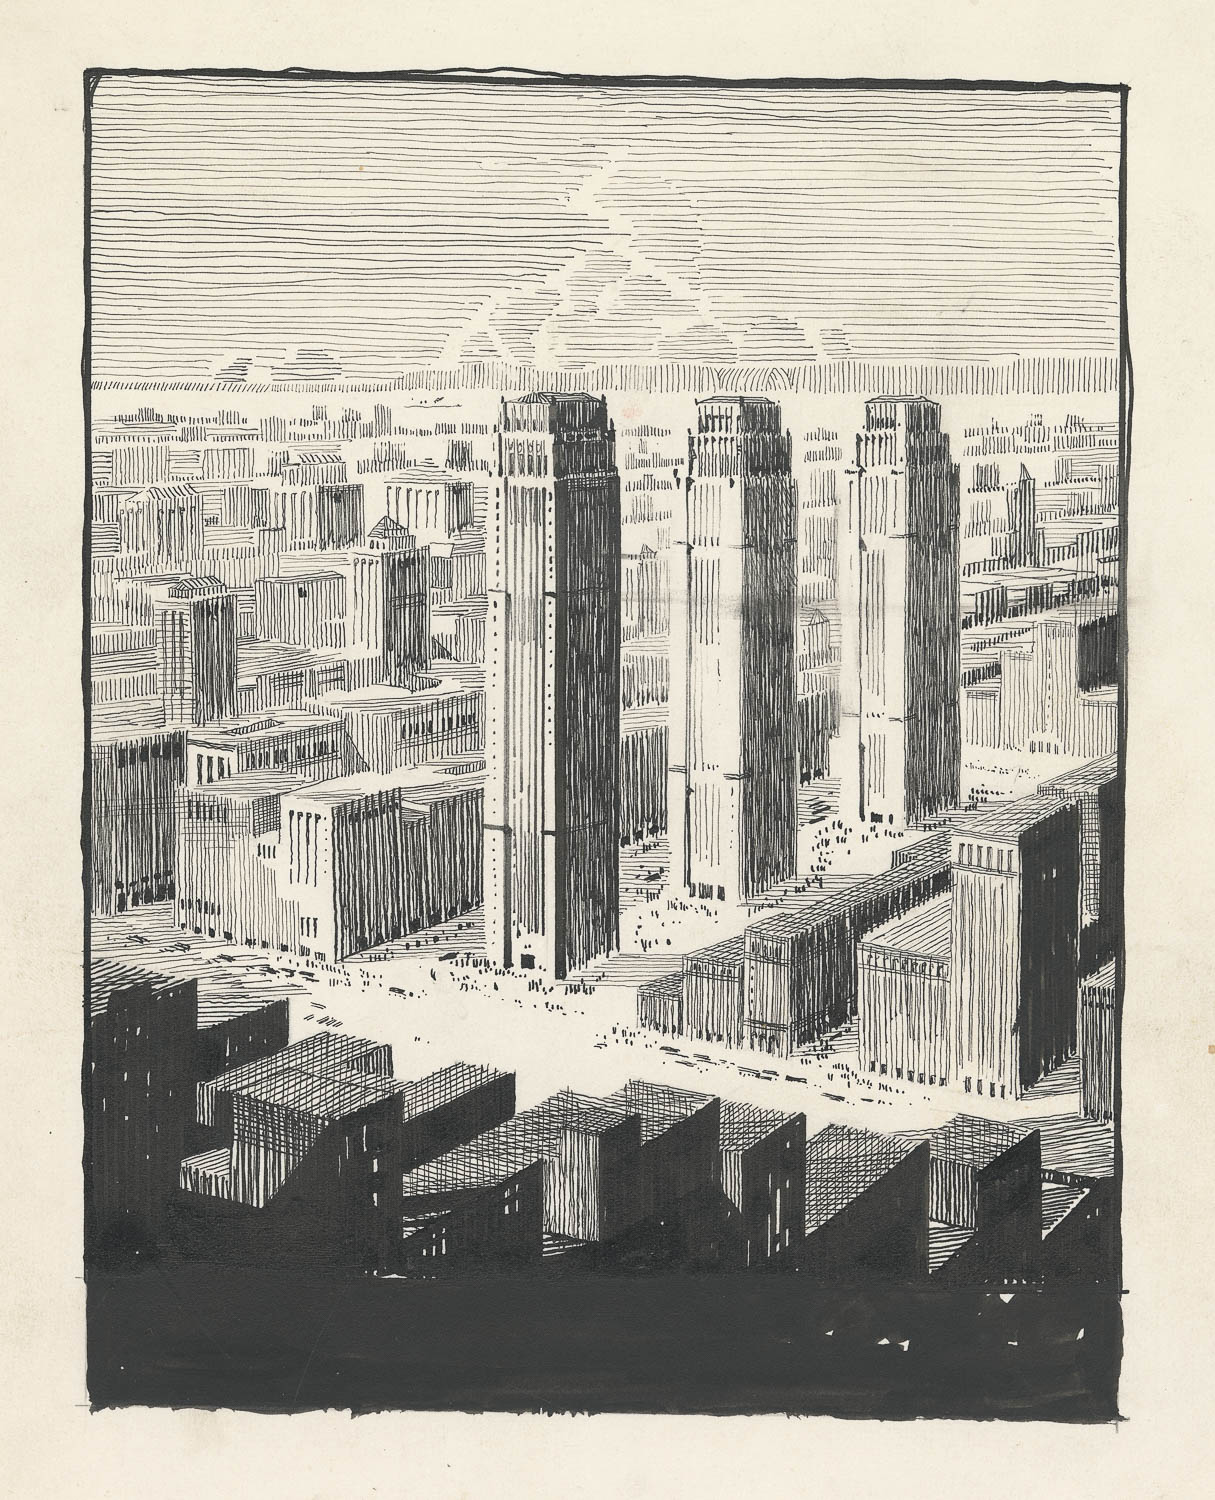 A bold drawing of three skyscrapers in a line, receding into the distance. The skyscrapers stand on the same long rectangular city block. Each skyscraper has four equal faces and there are no setbacks aside from slight indentations at the tops. There is lots of open space around the base of the skyscrapers. The buildings do not touch and are not placed against the sidewalk or street.